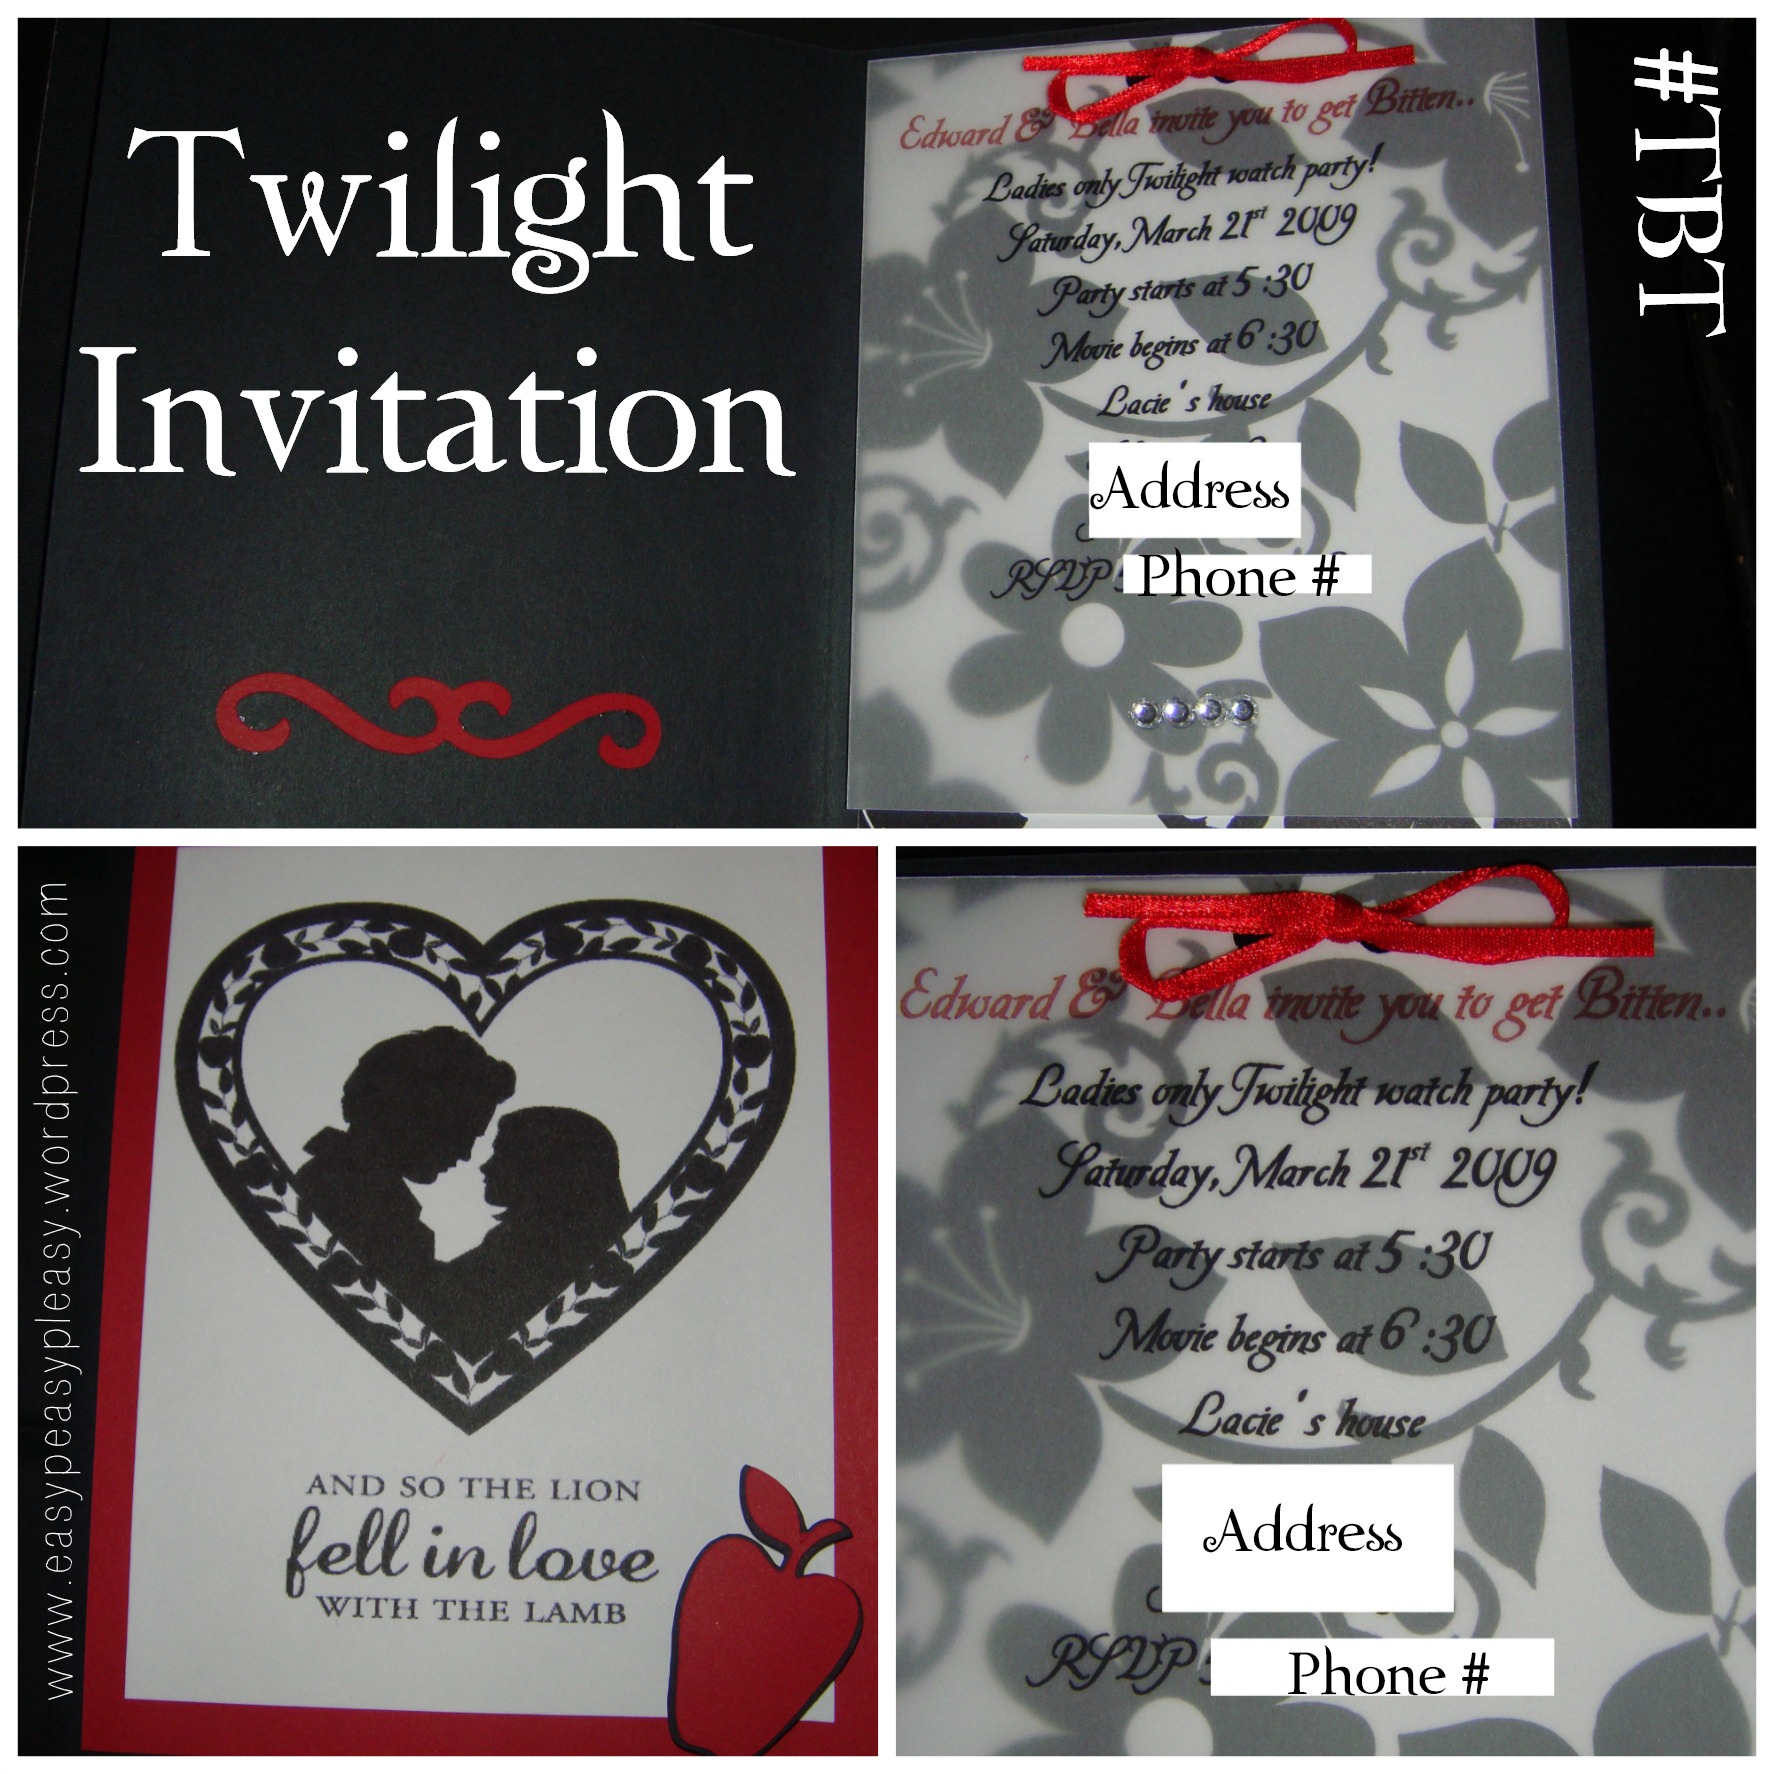 Twilight Invitation Opened and Front View #TBT